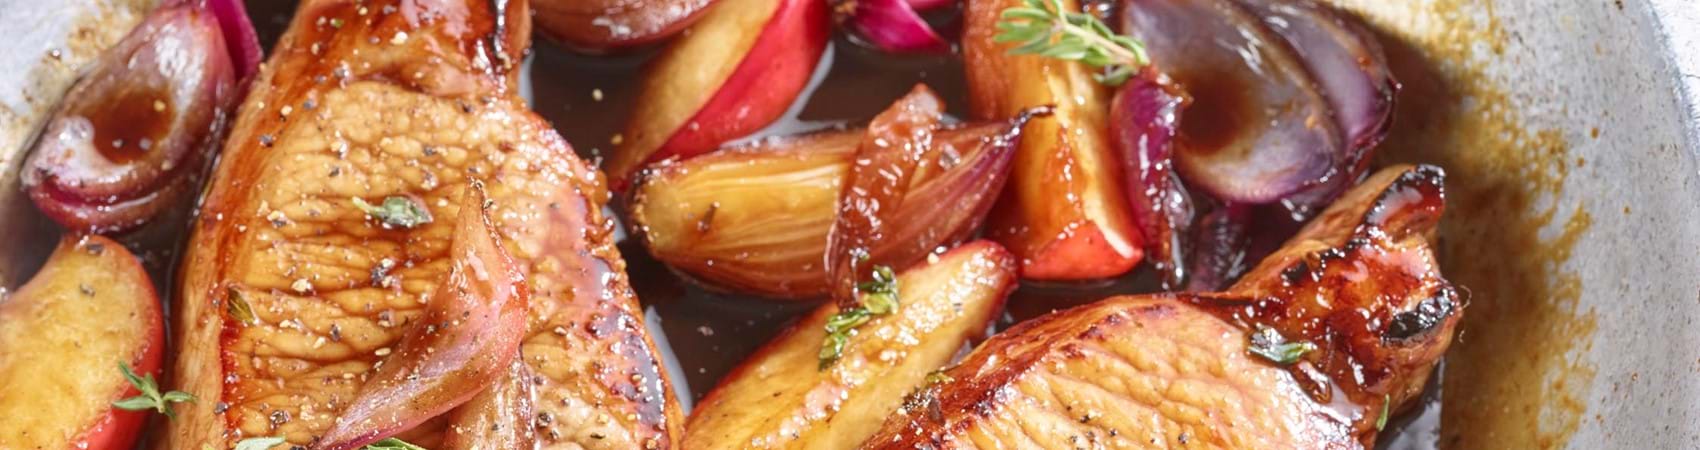 Balsamic Pork with Apples